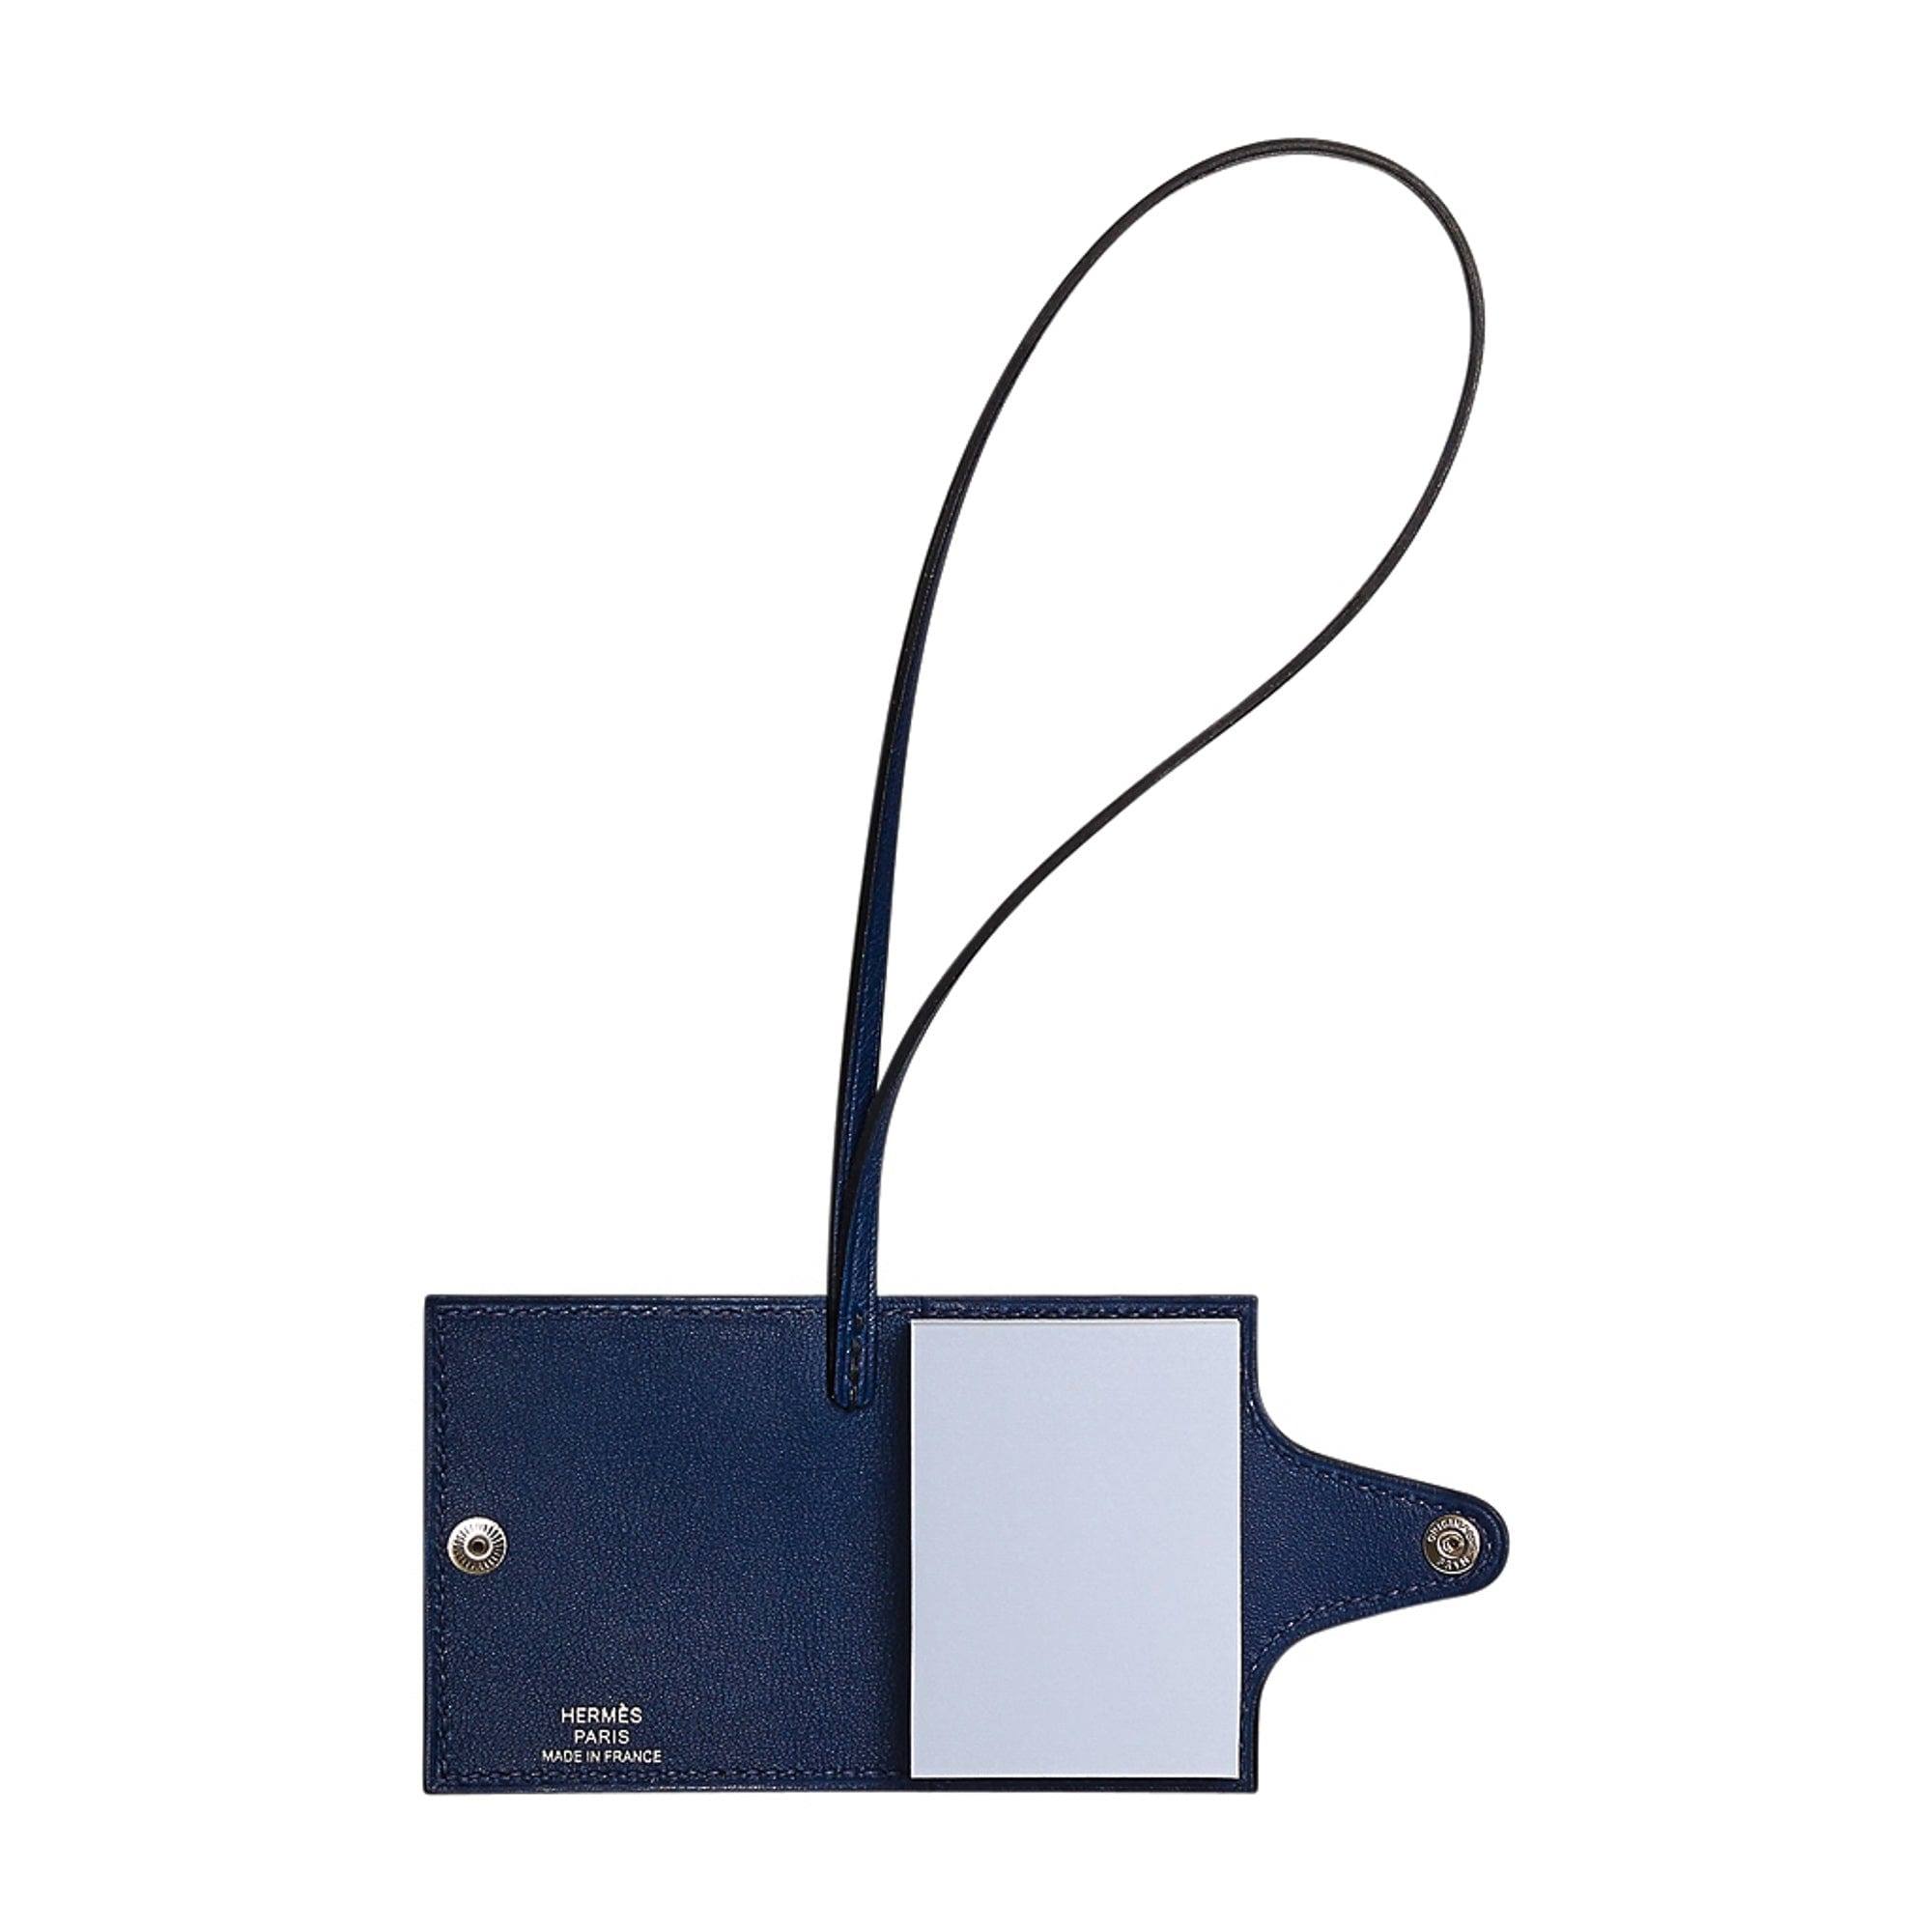 Hermes Black/Blue Sapphire Coated Canvas and Leather Limited